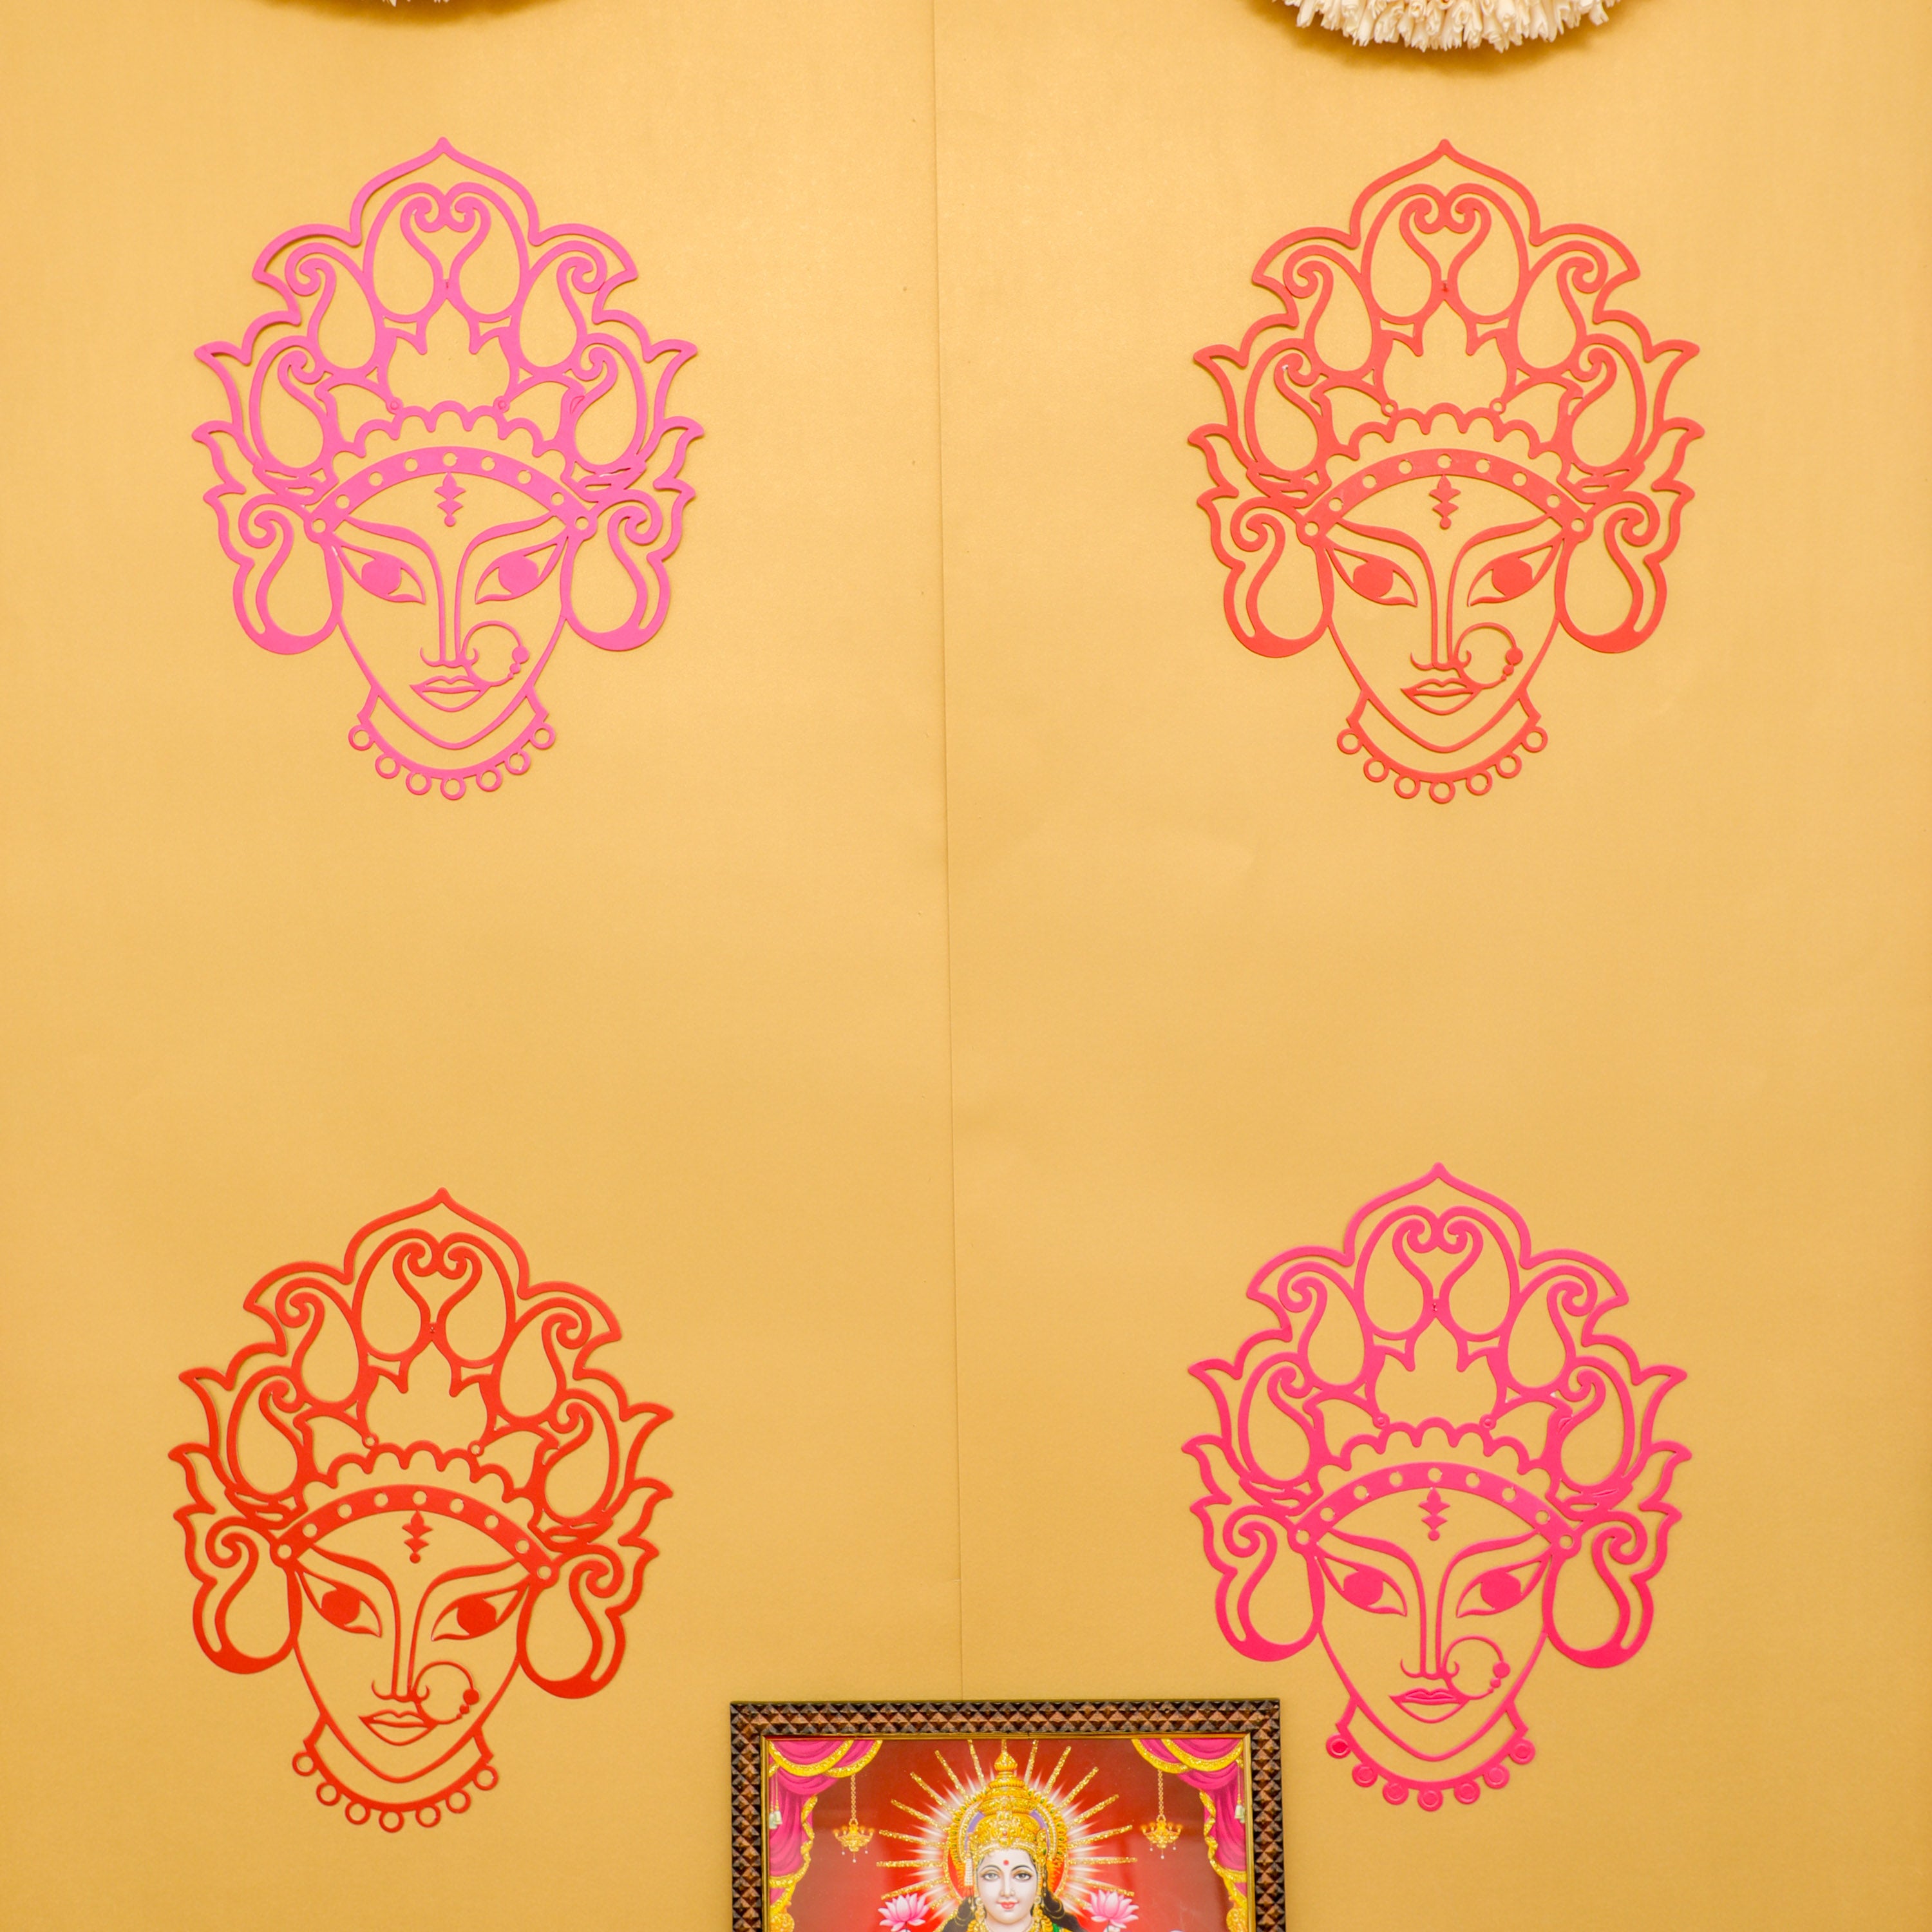 Durga face cutouts for decoration in the USA